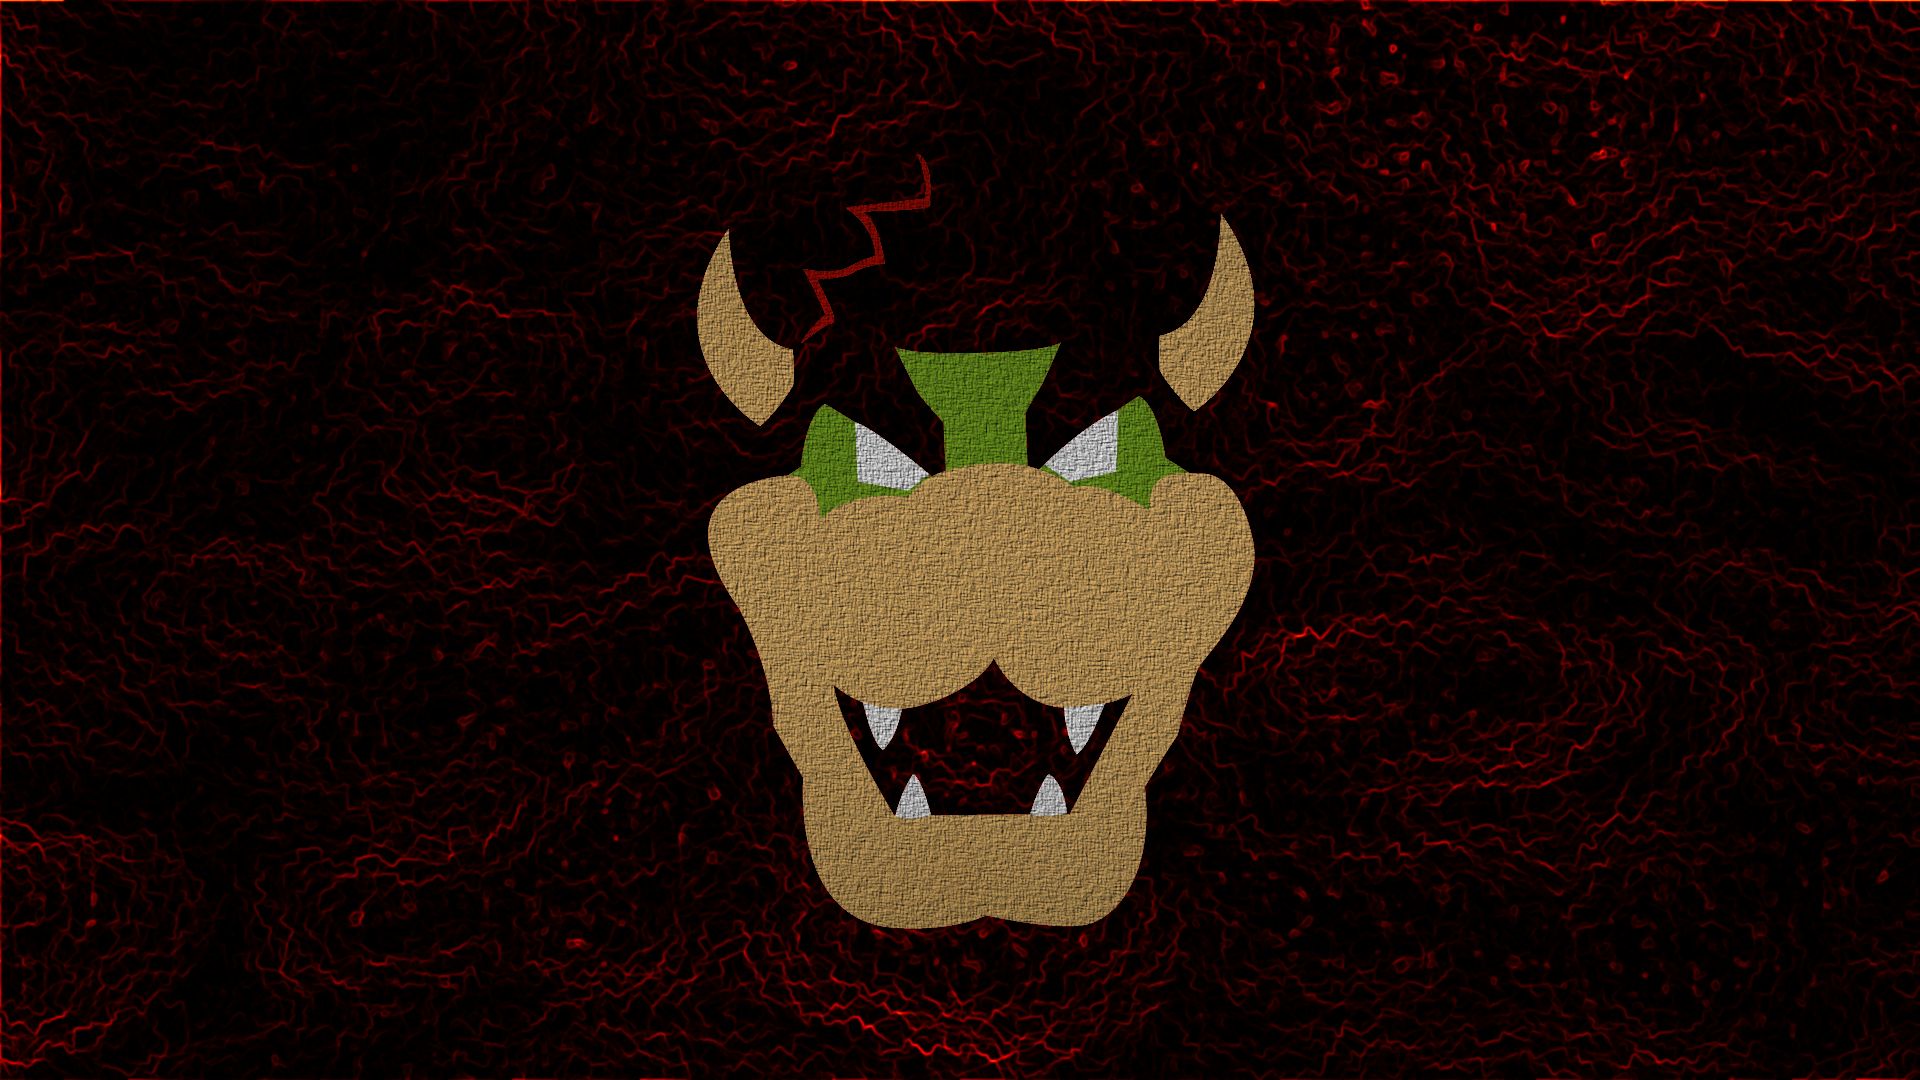 100+] Bowser Wallpapers | Wallpapers.com